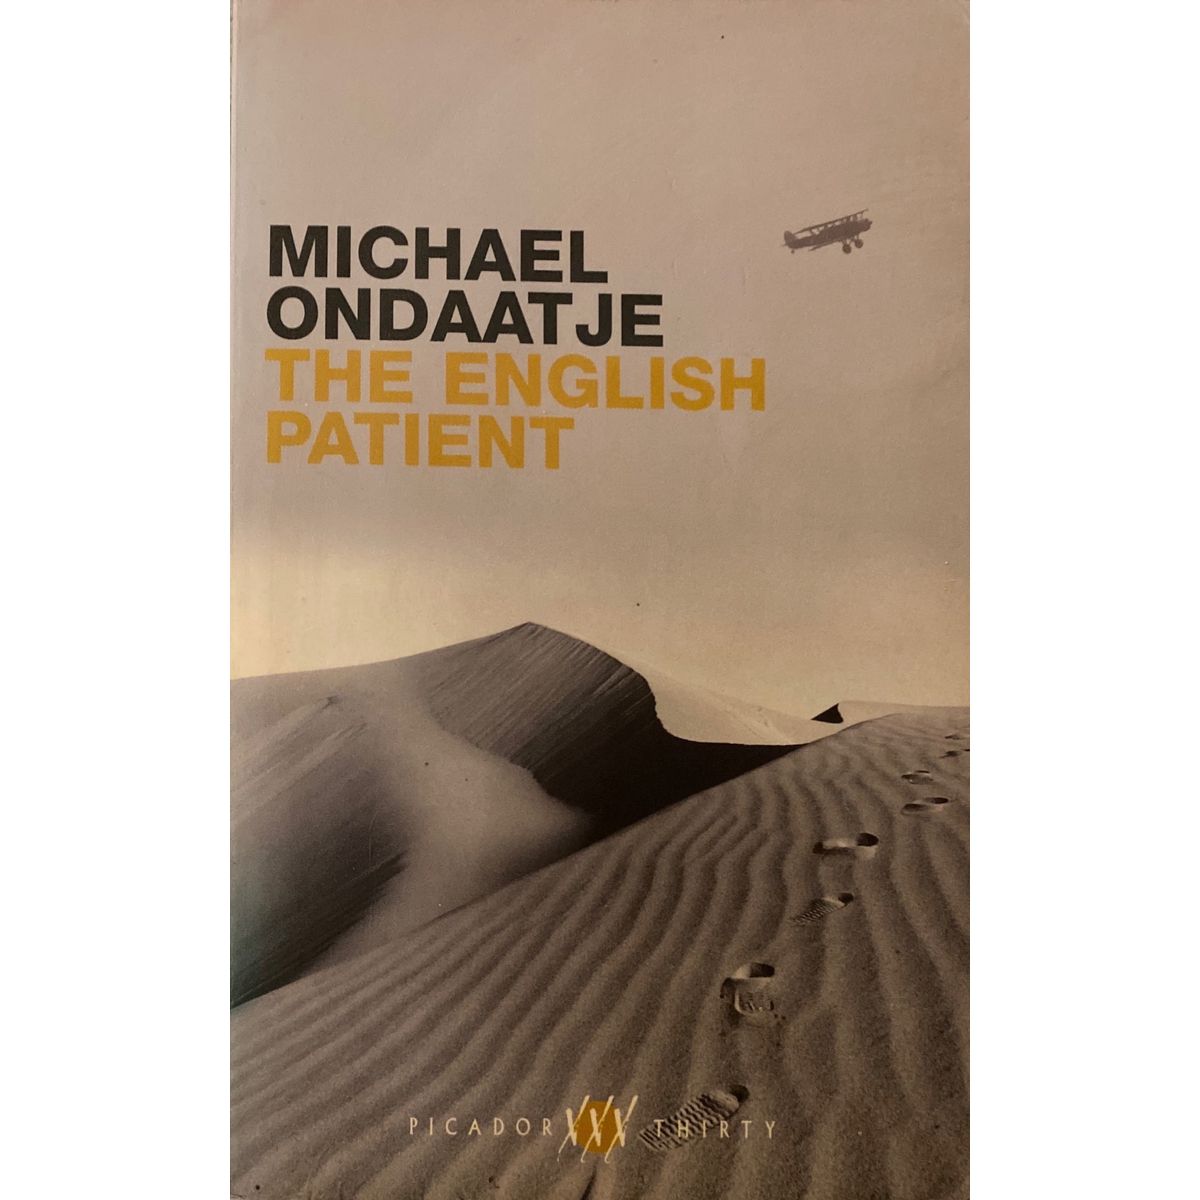 ISBN: 9780330491914 / 0330491911 - The English Patient by Michael Ondaatje [2002]